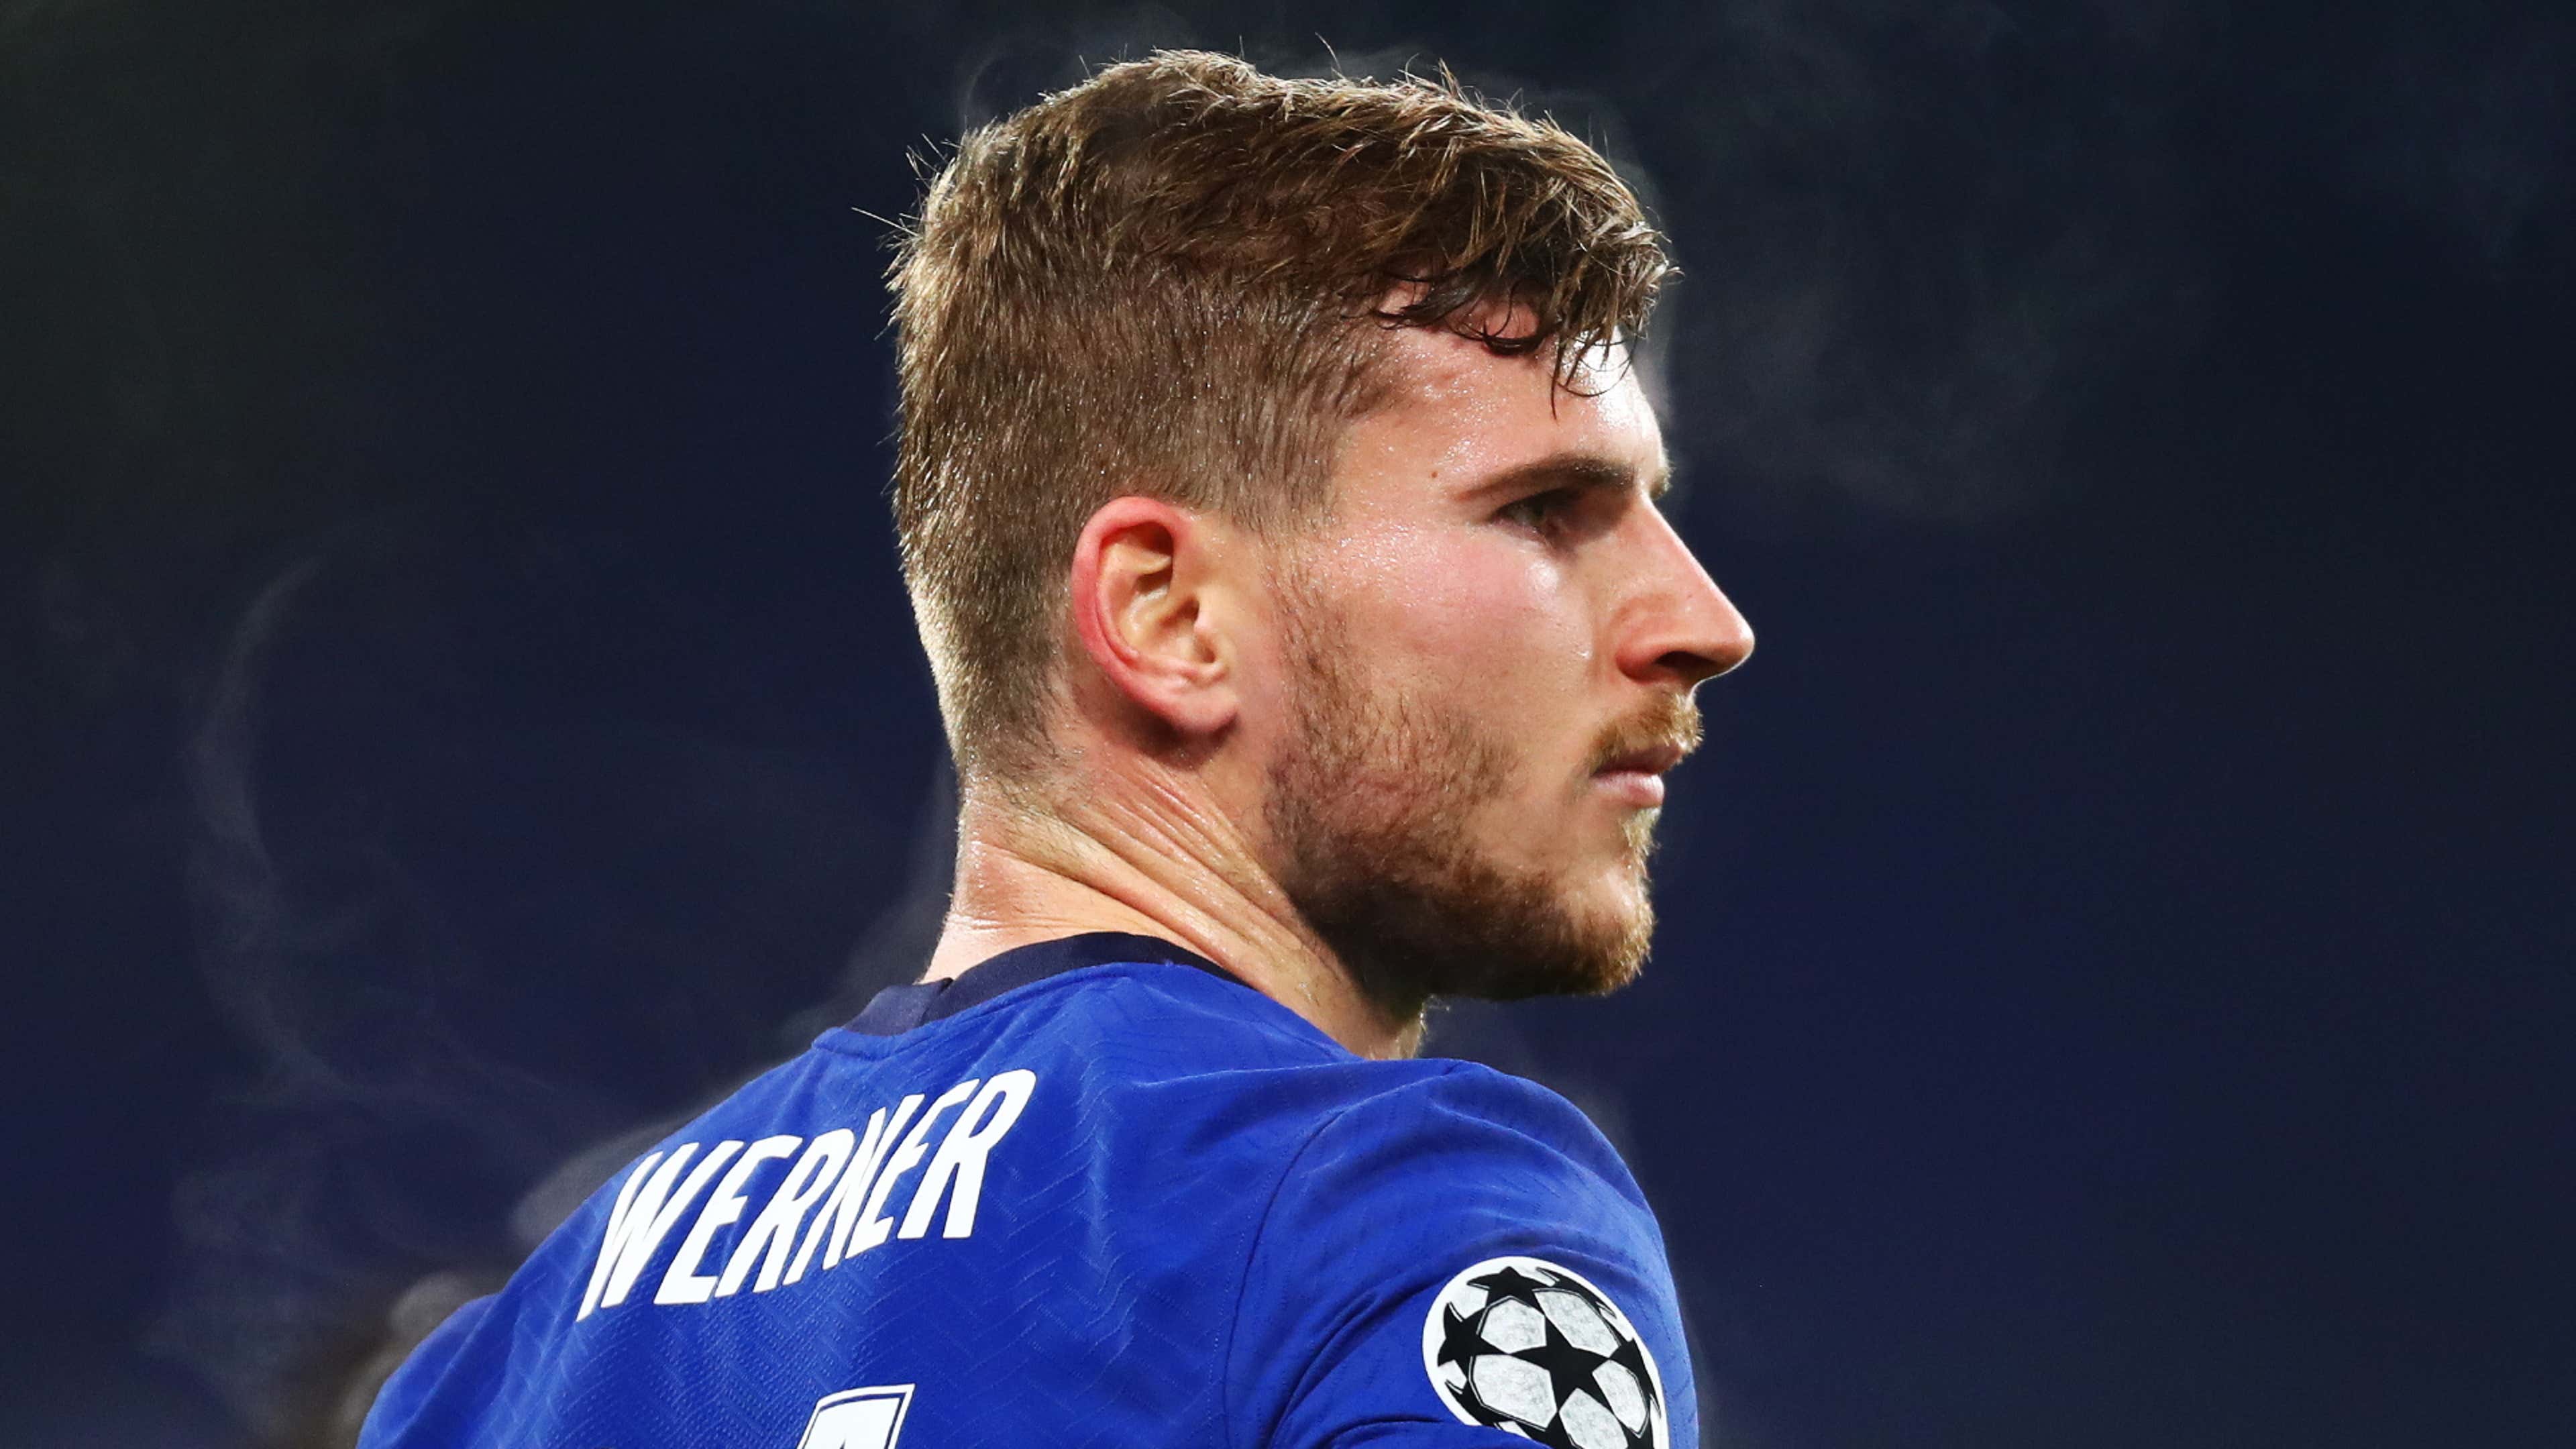 Timo Werner, Chelsea, Champions League 2020-21